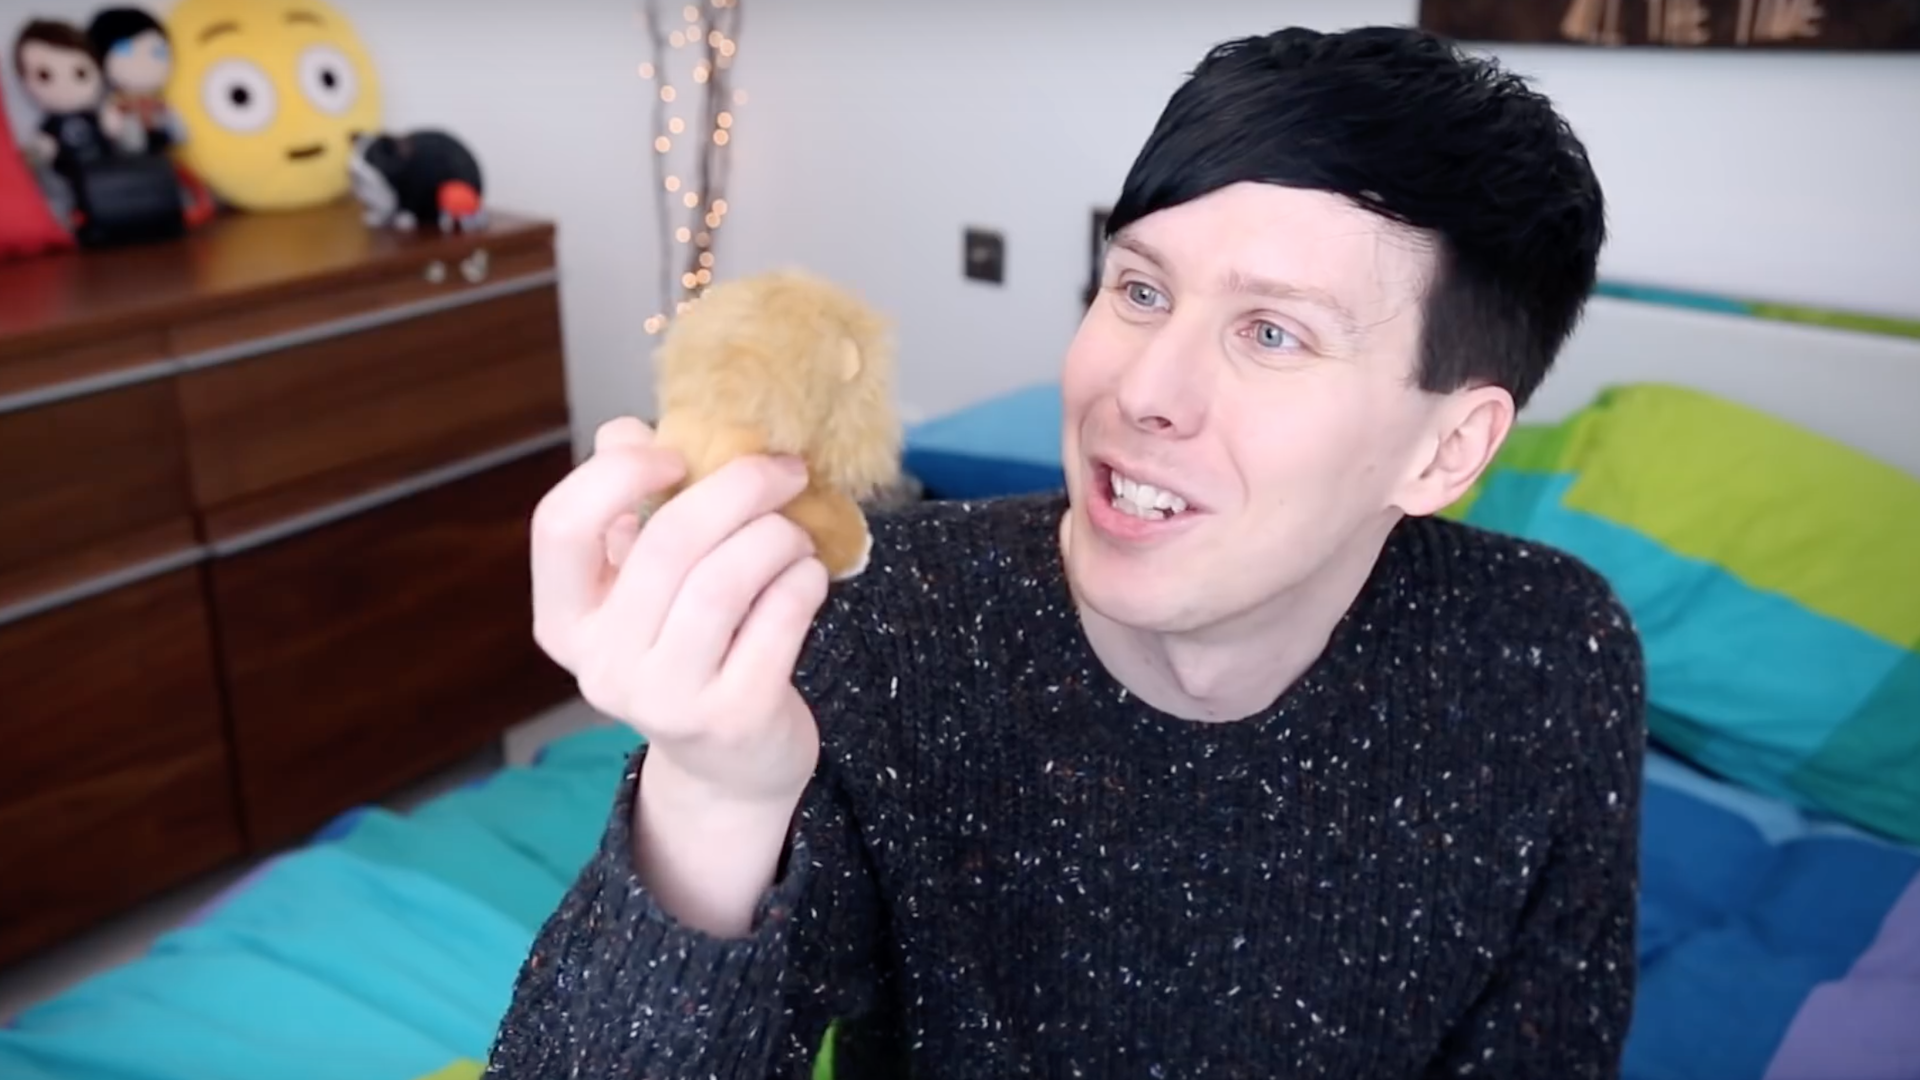 Dan holds up a toy lion